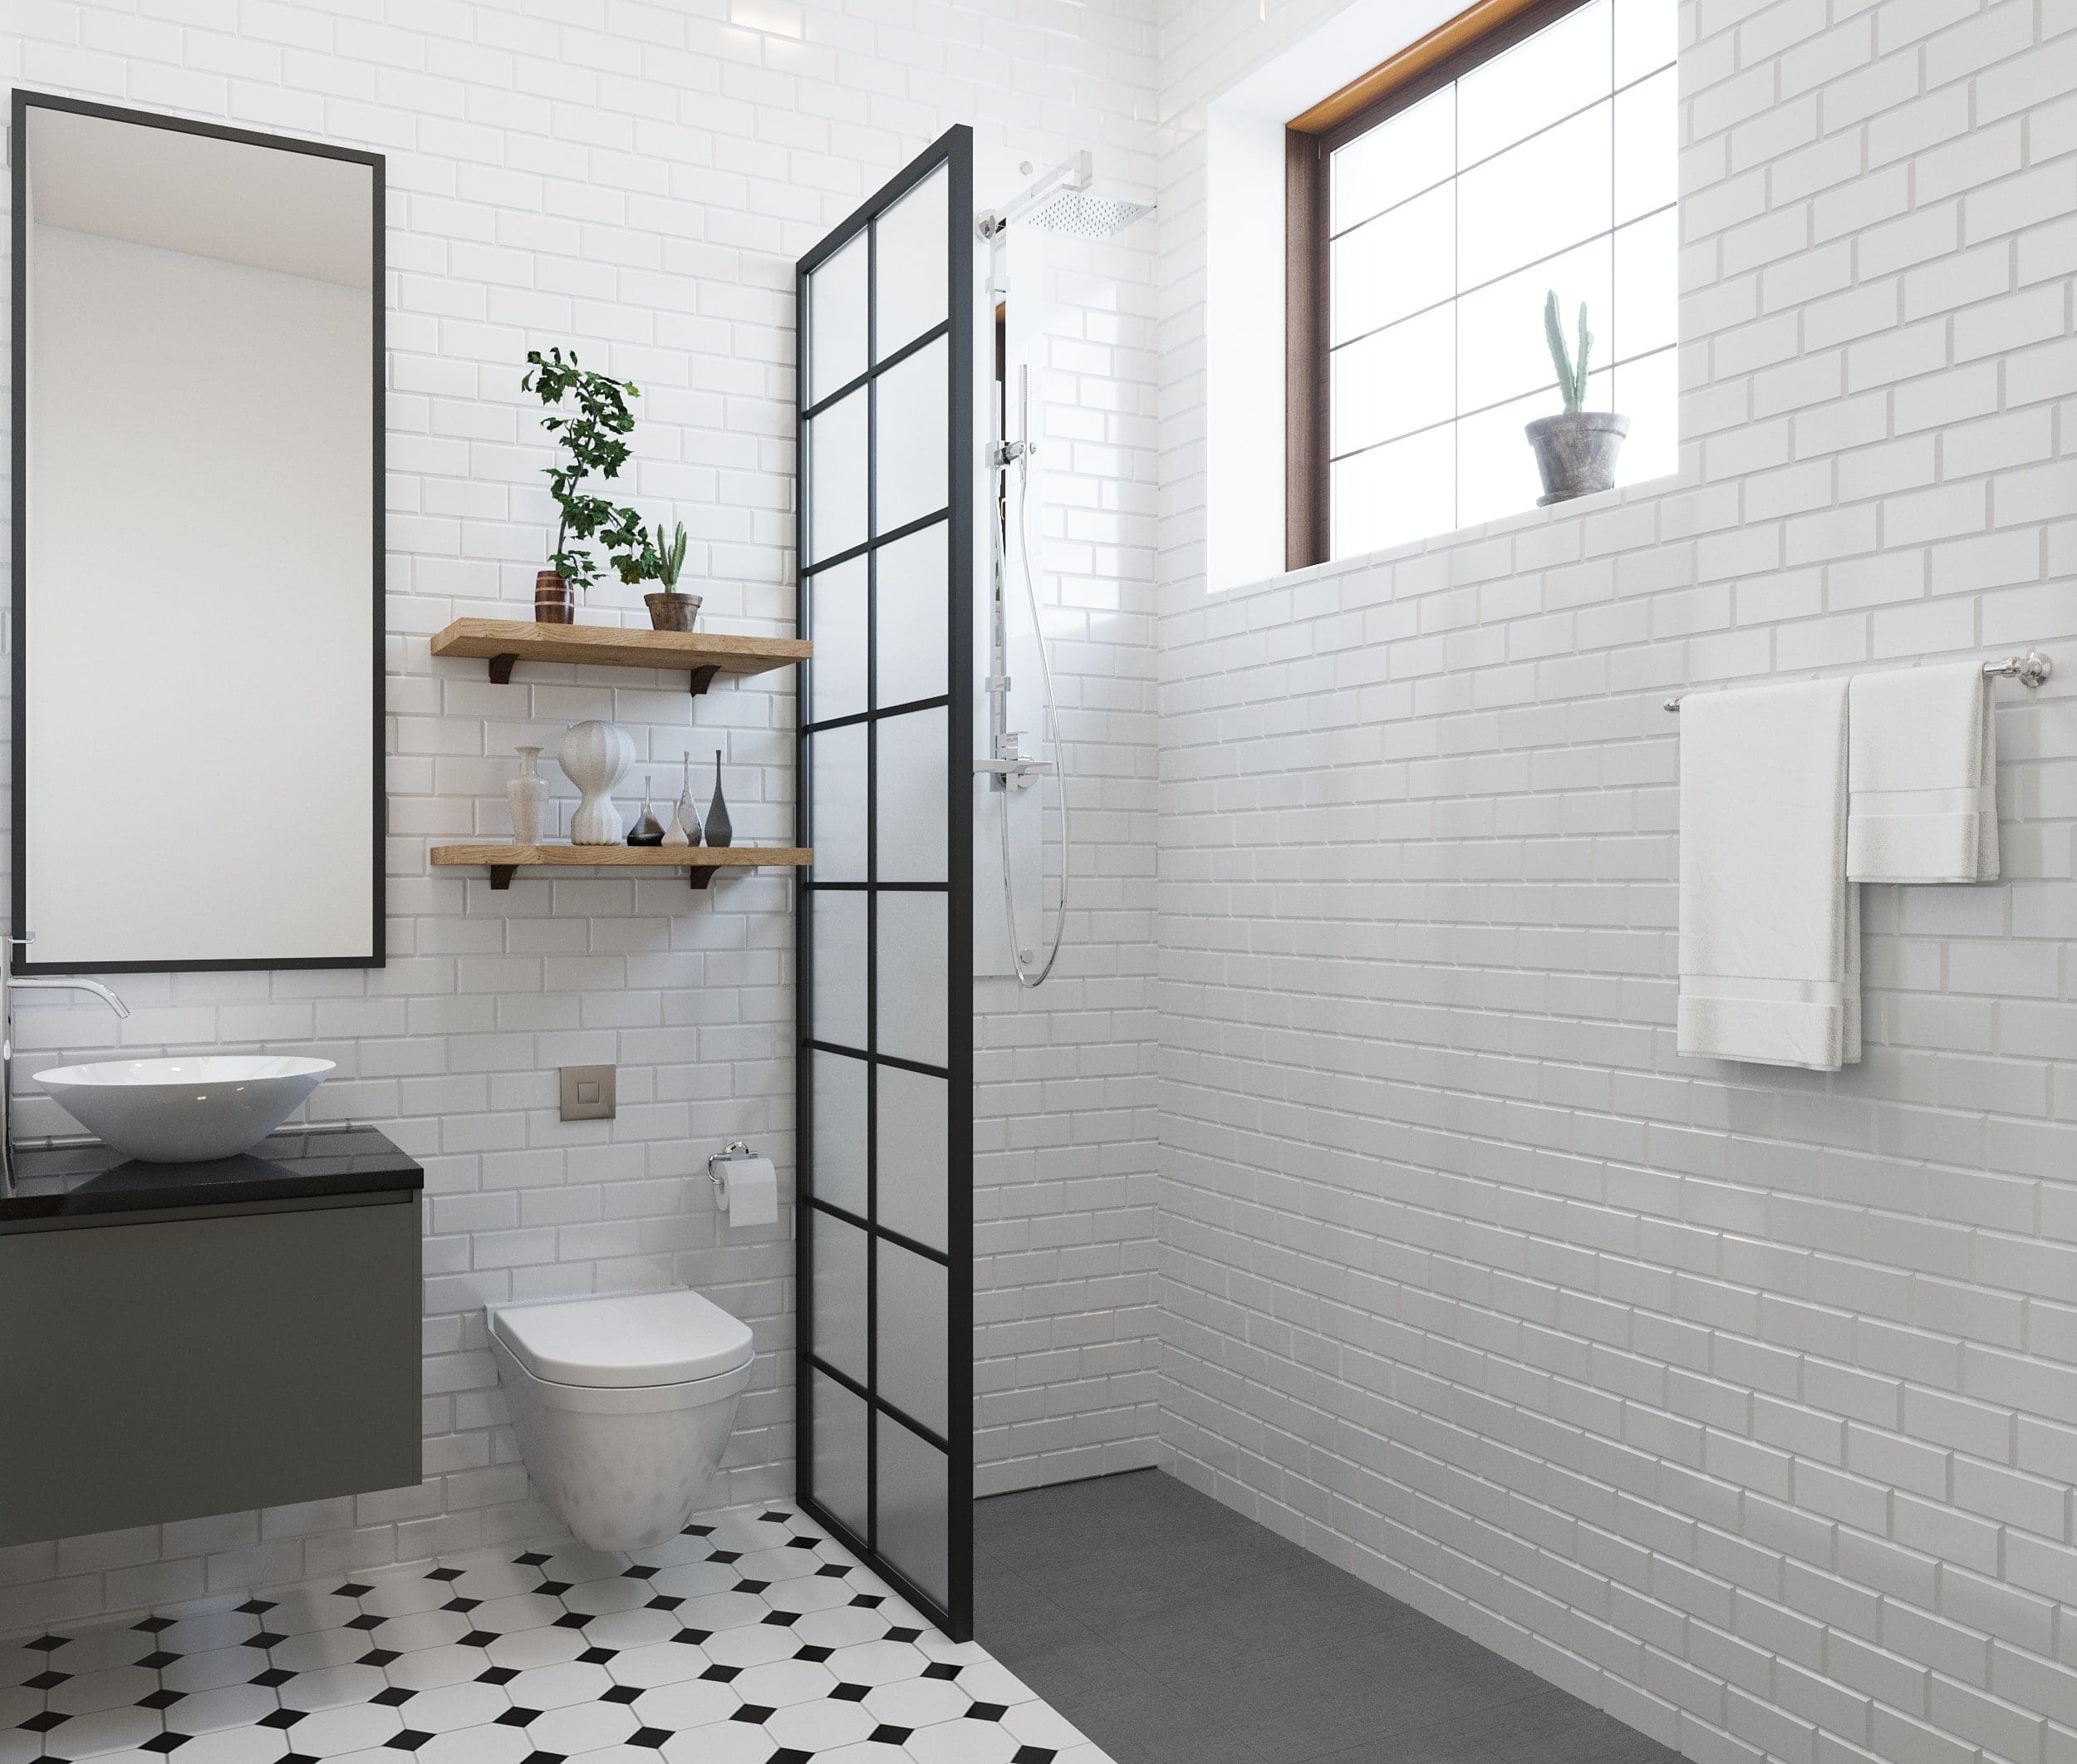 A black and white bathroom with a curbless shower, which ponders the question of whether or not curbless showers are worth it.